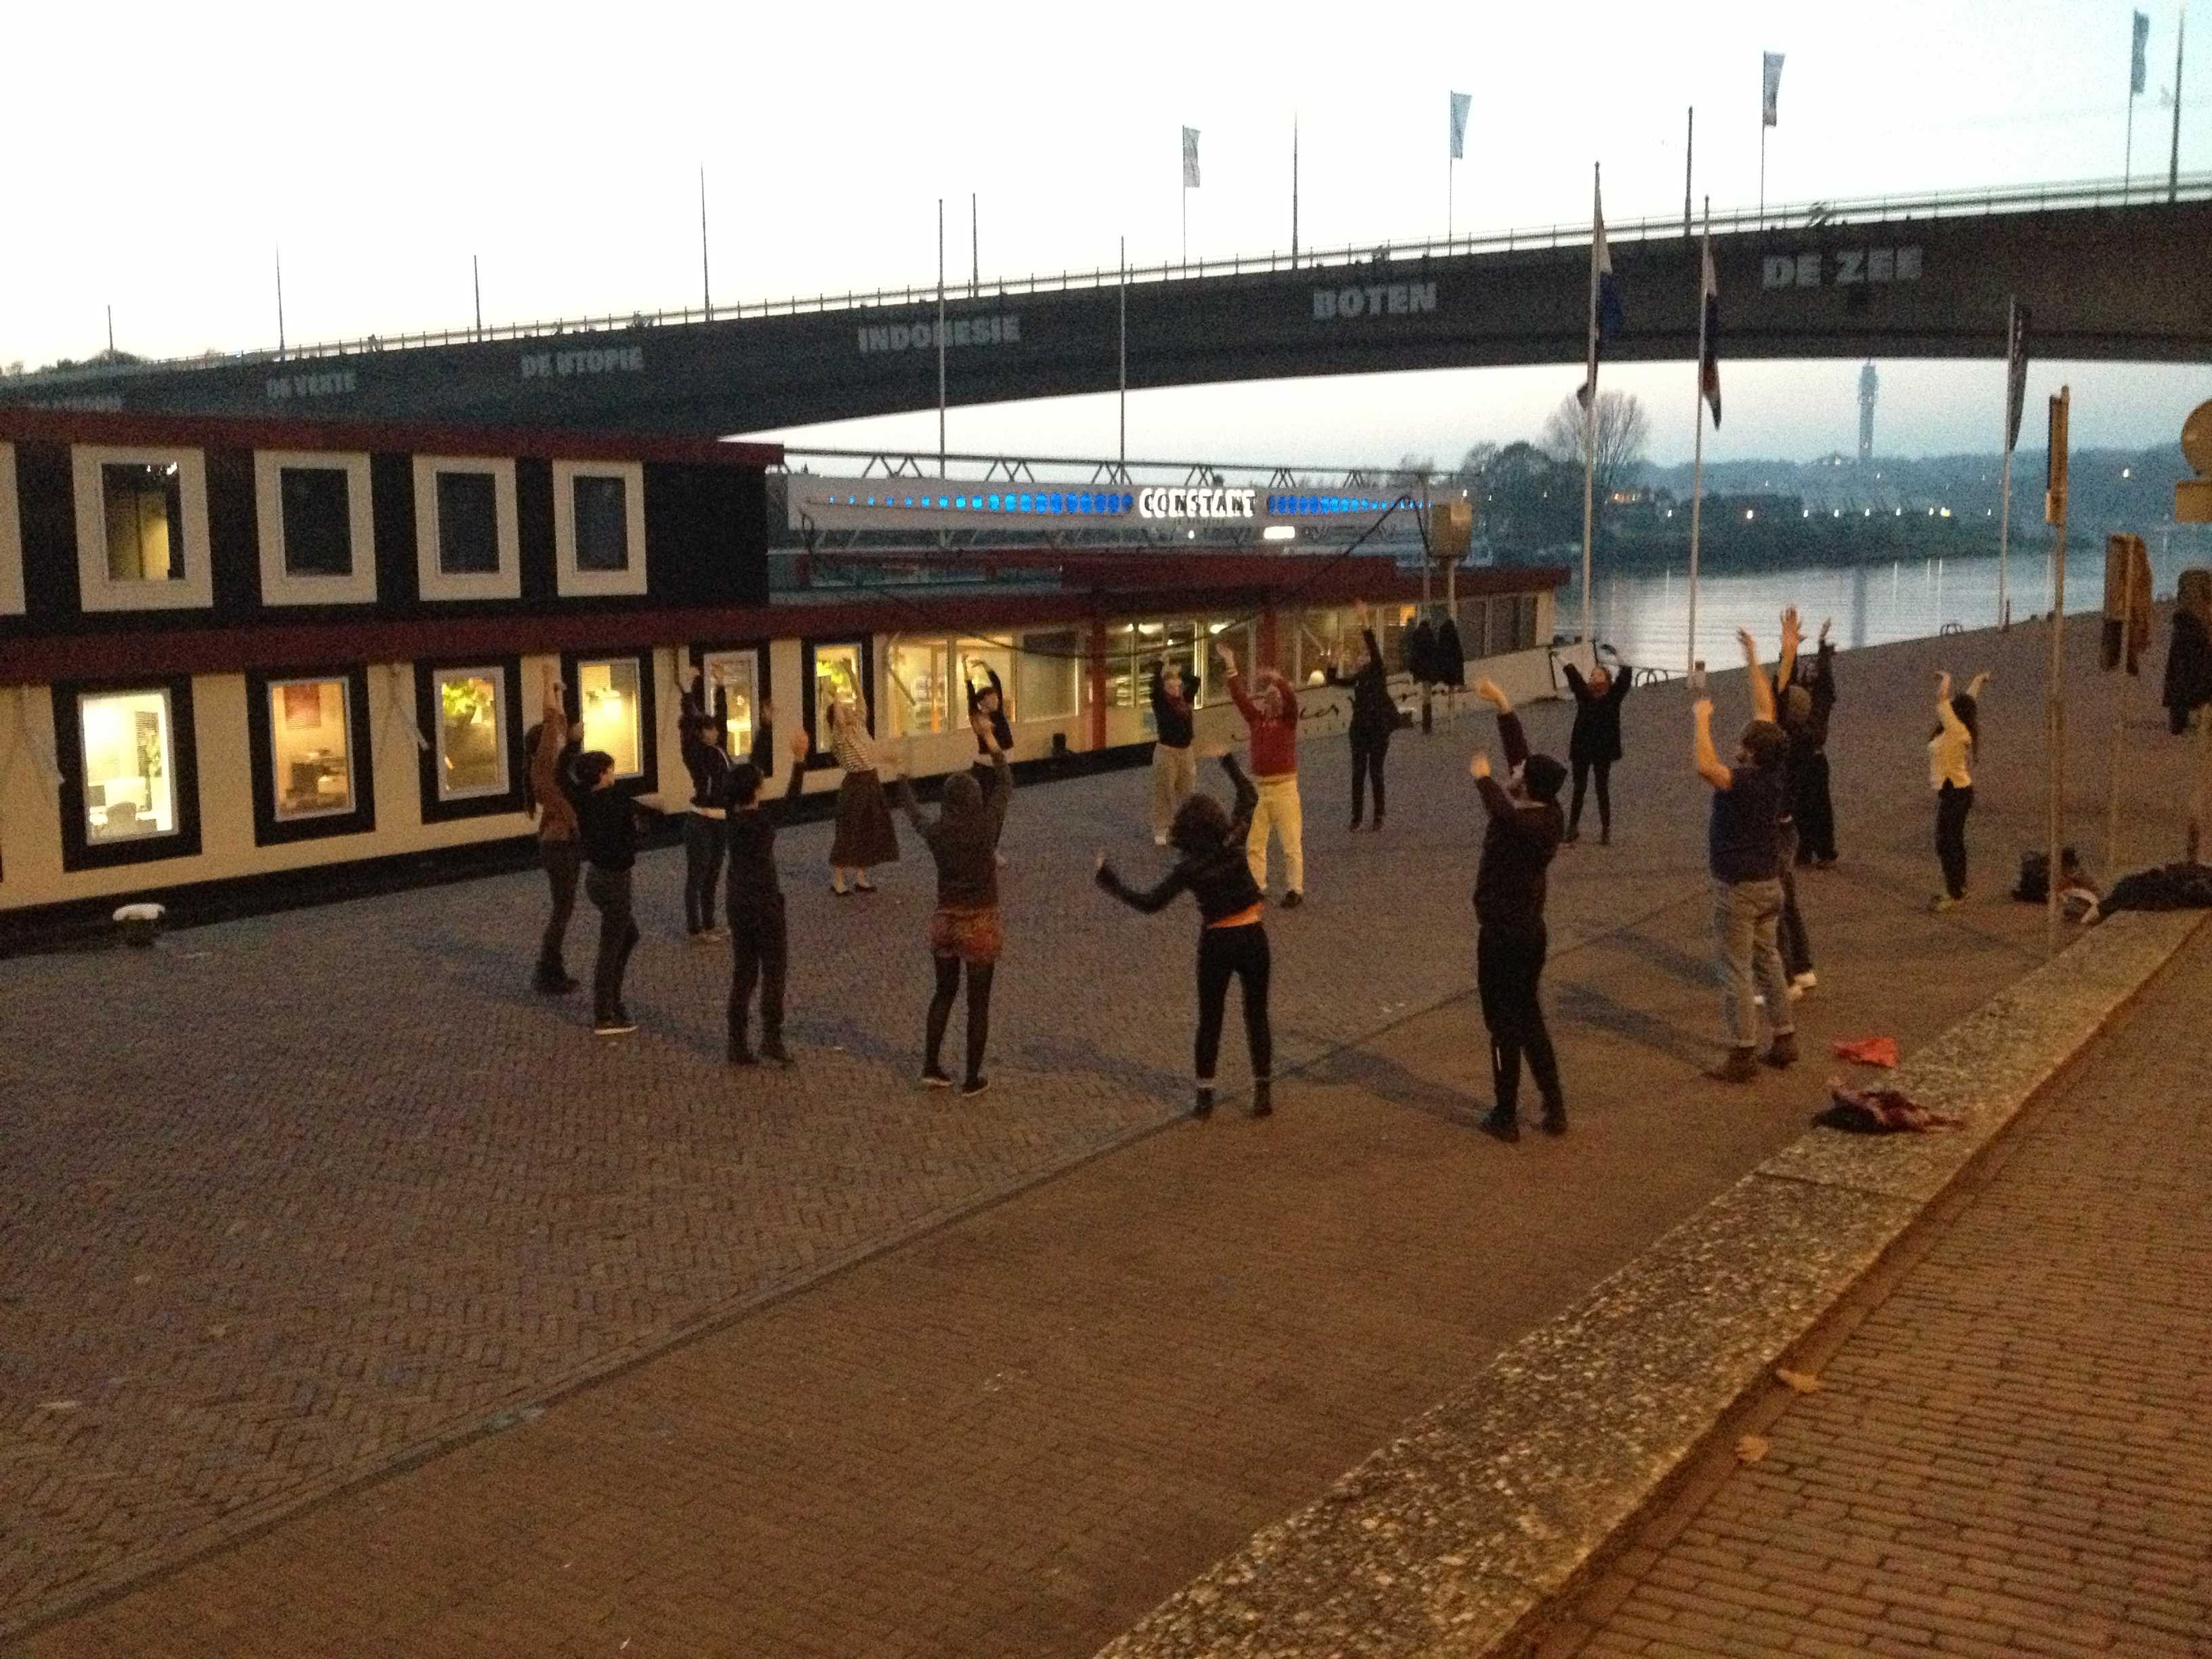 DAI-week November 2014 session, under the Nelson Mandela bridge over the river Nederhijn in Arnhem. The text on the bridge is part of an art piece by Rémy Zaugg, commissioned by Sonsbeek '93